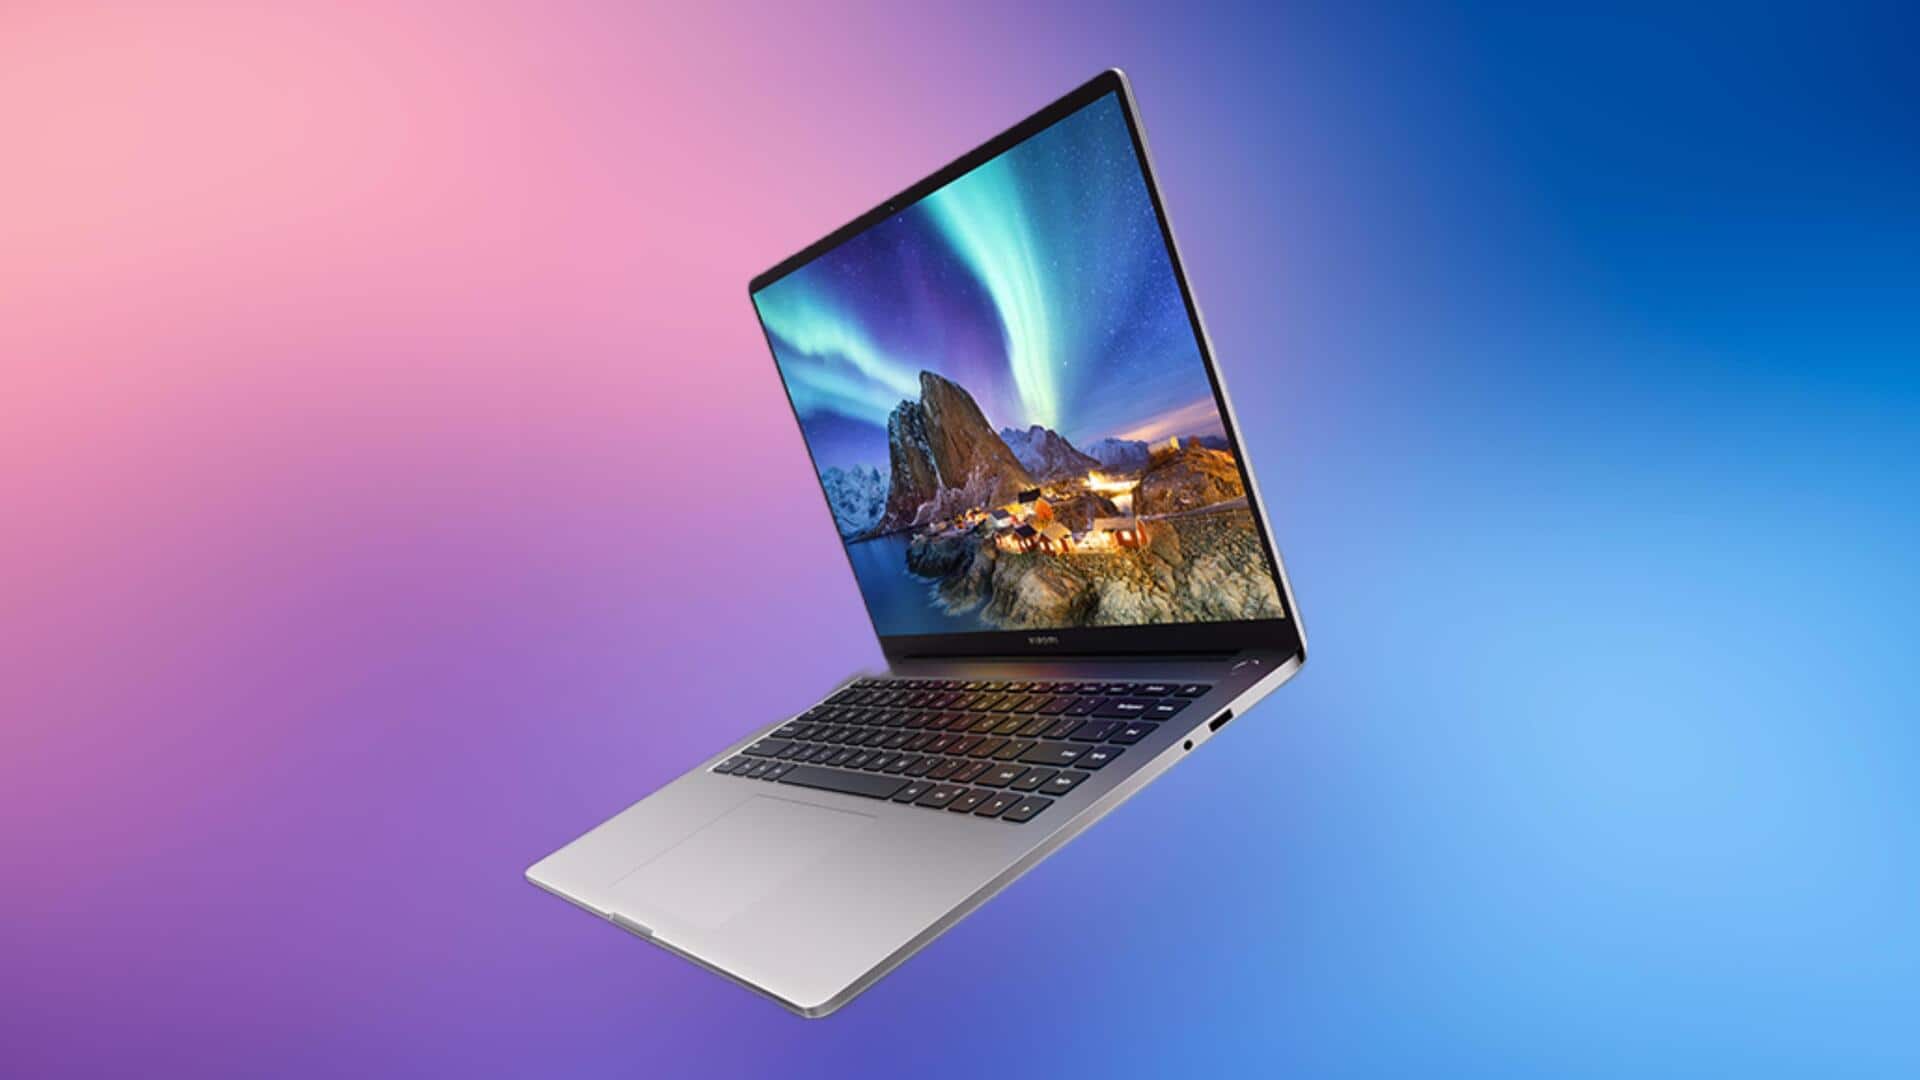 Xiaomi Notebook Ultra gets cheaper on Amazon: Check deal